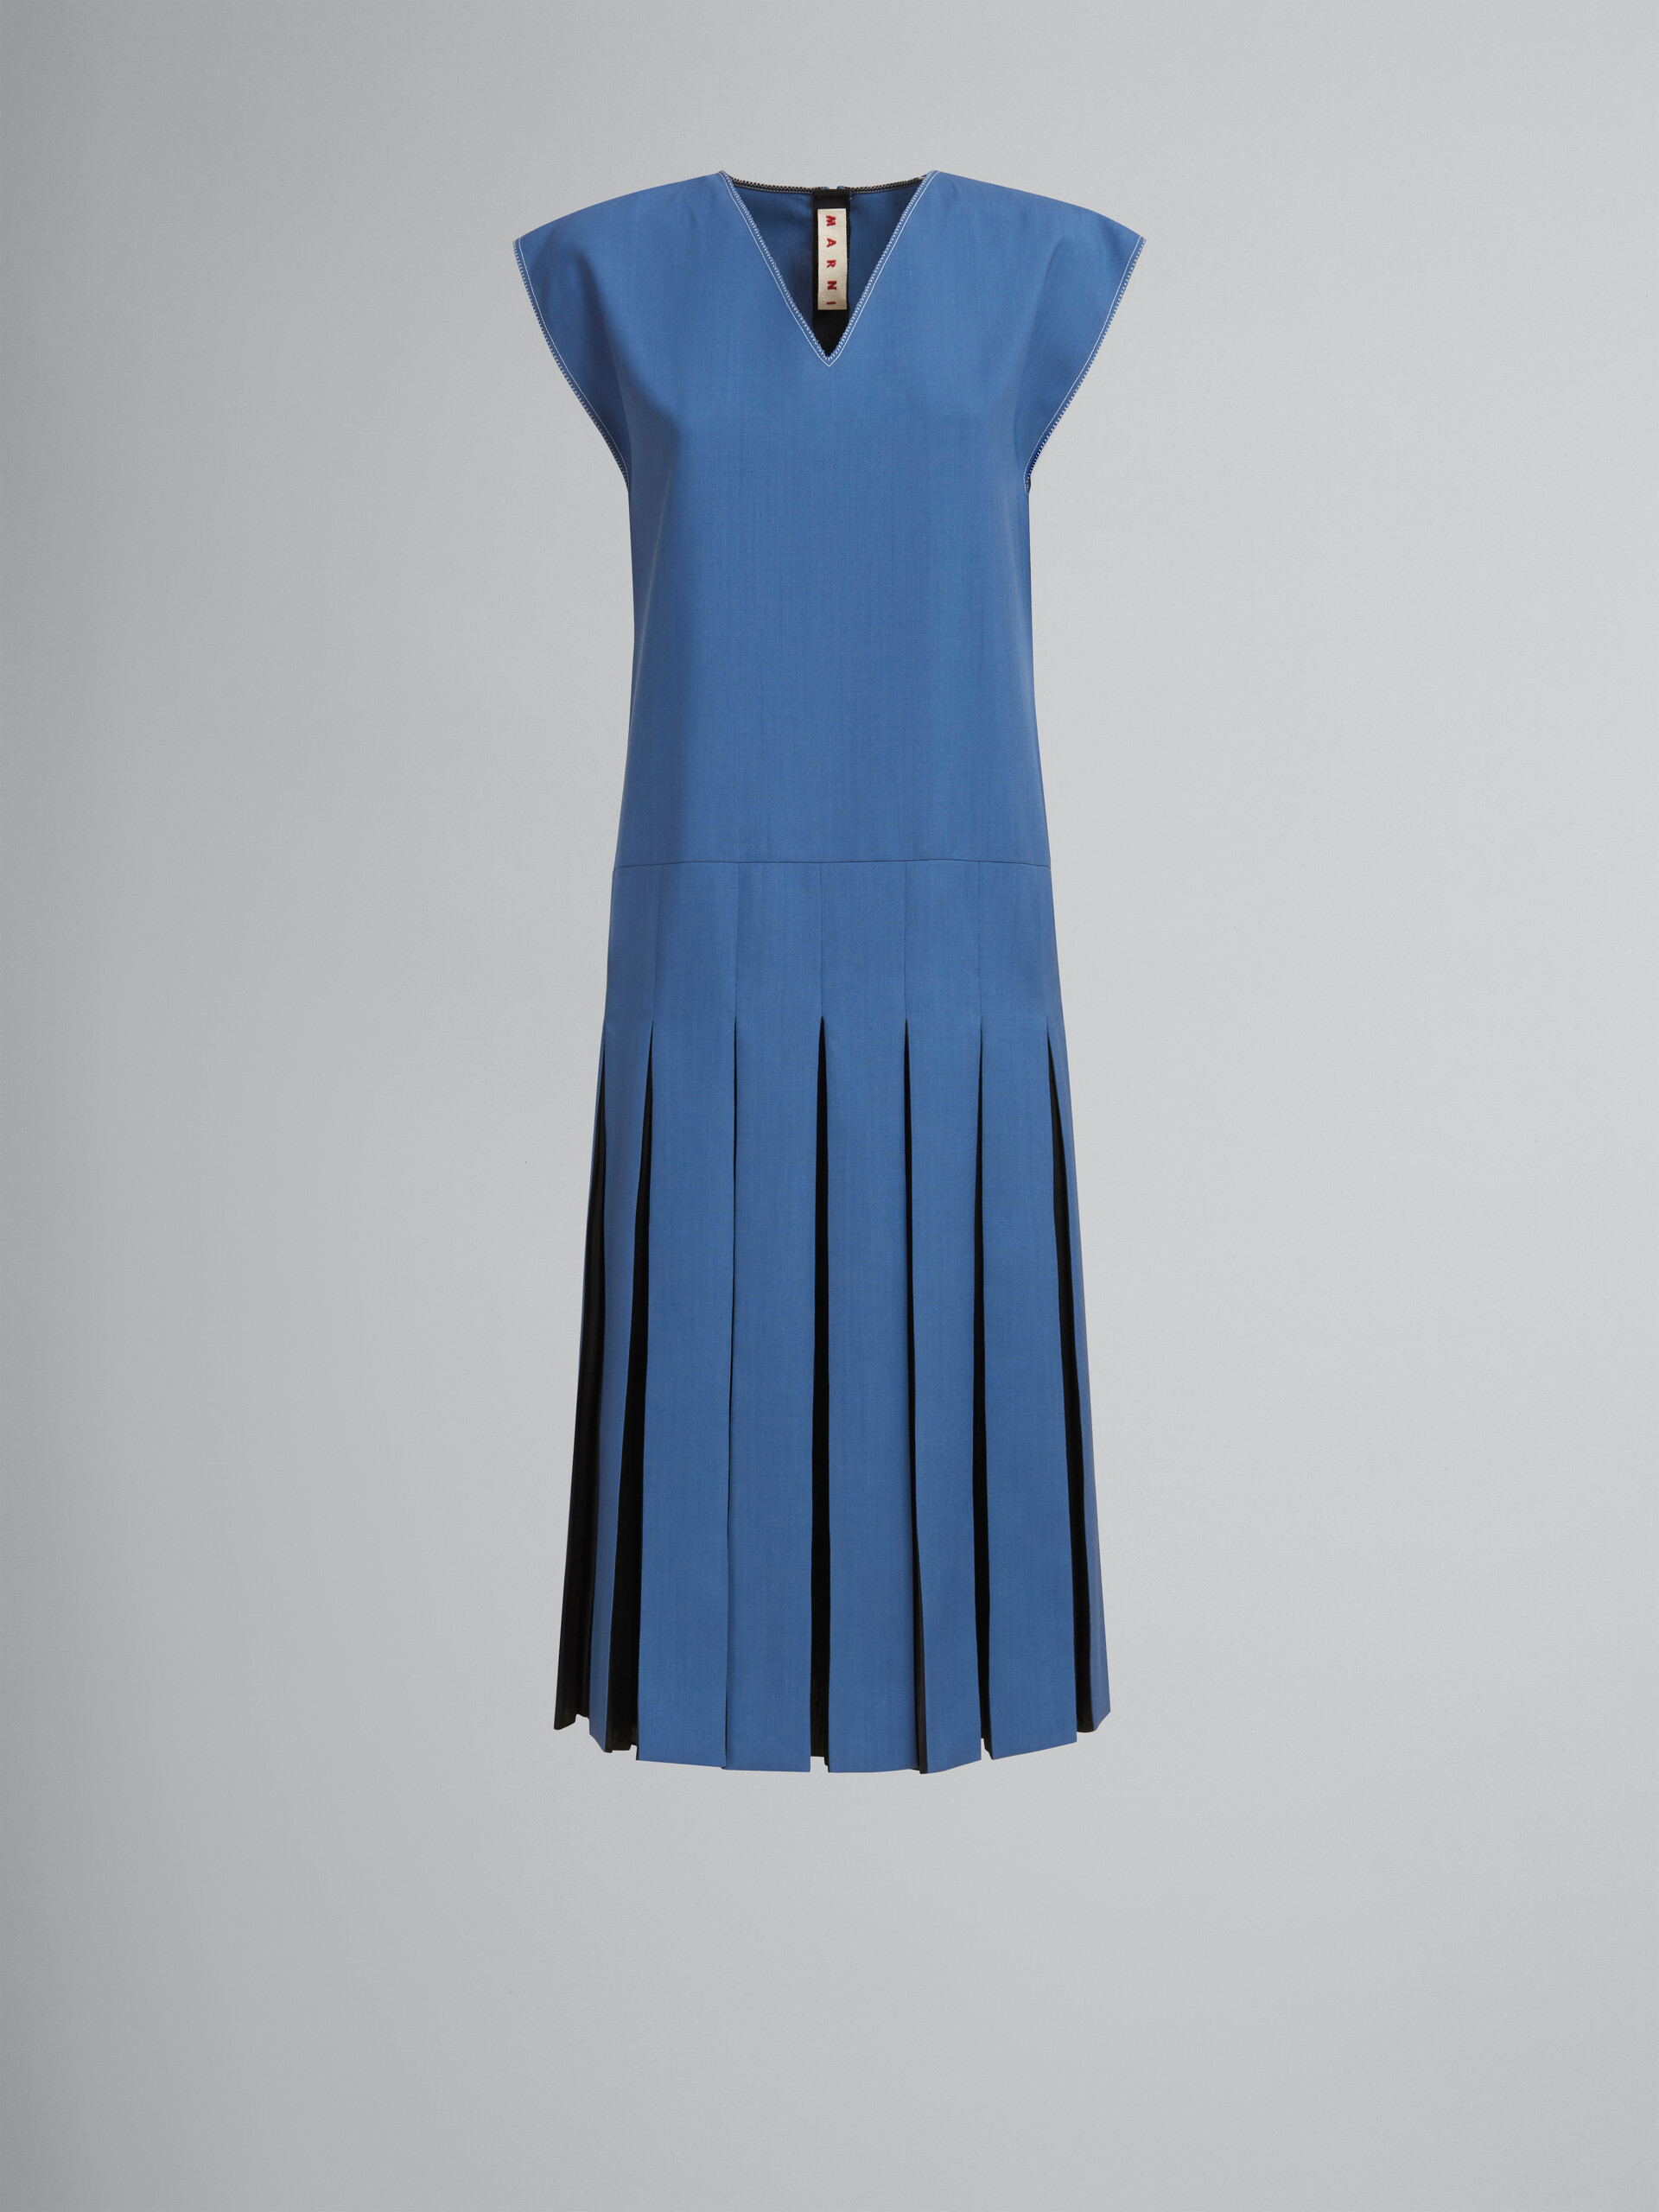 Blue tropical wool dress with contrast pleats - Dresses - Image 1